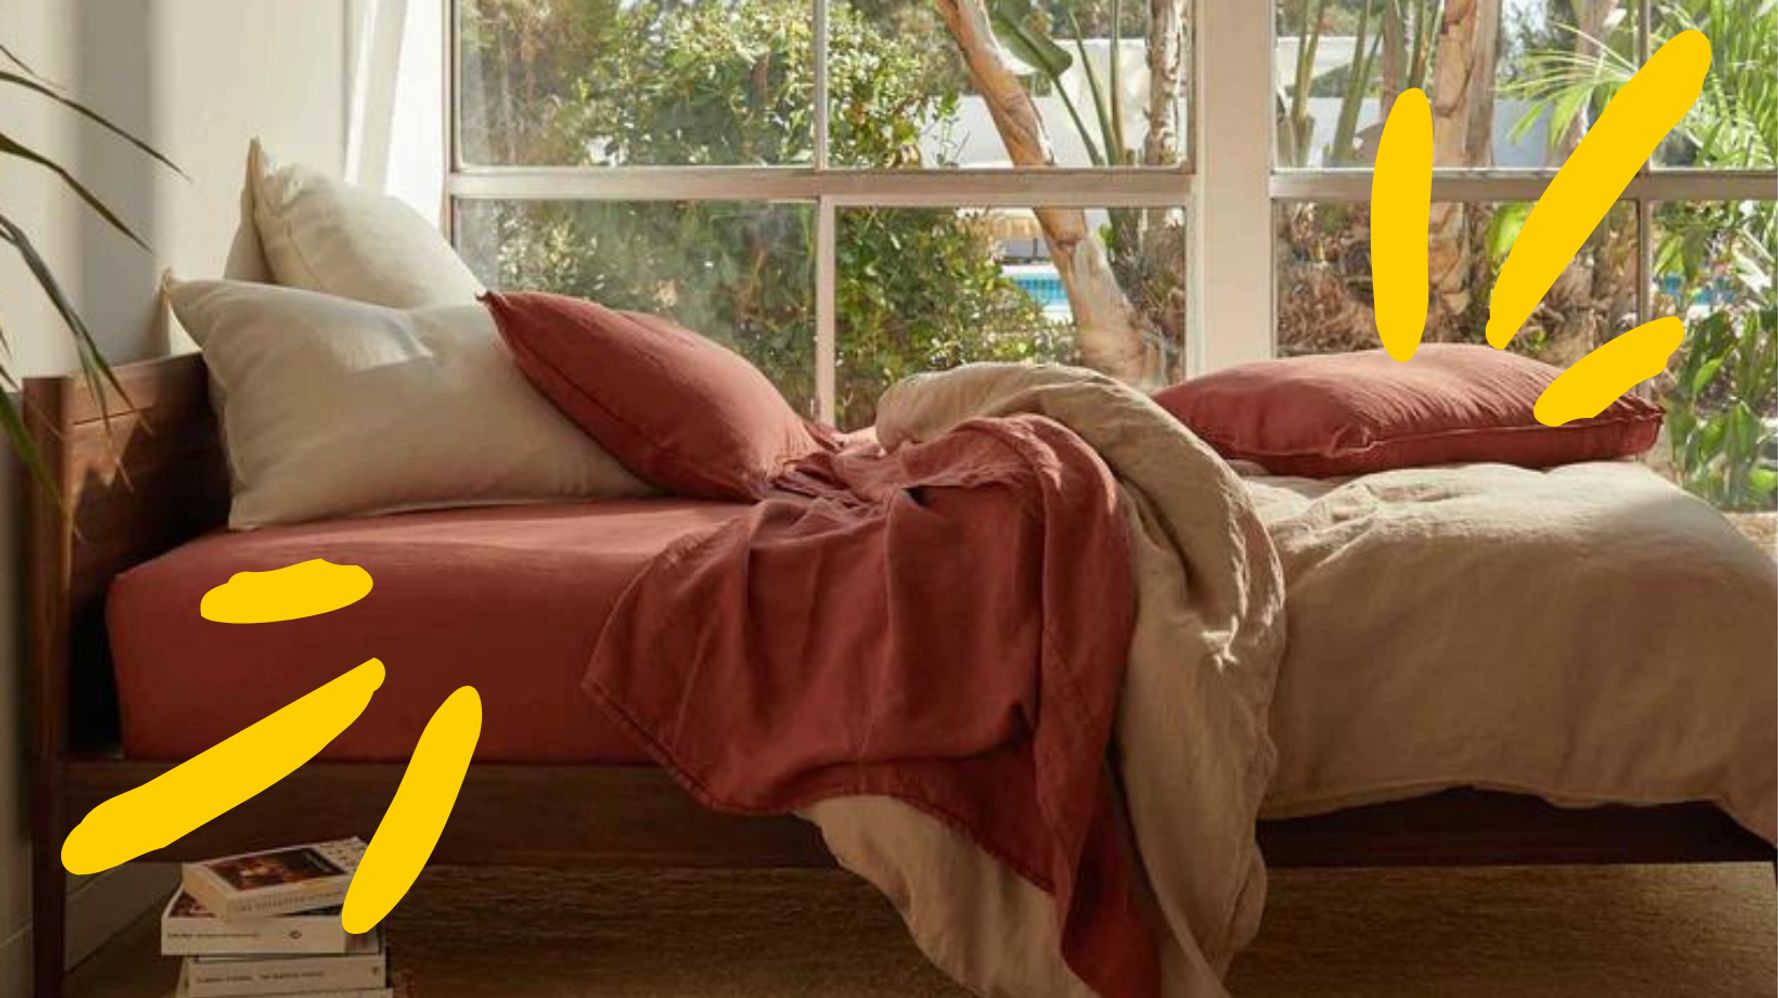 Brooklinen birthday sale 2022: Save on bedding, bathrobes, towels and more  - Good Morning America